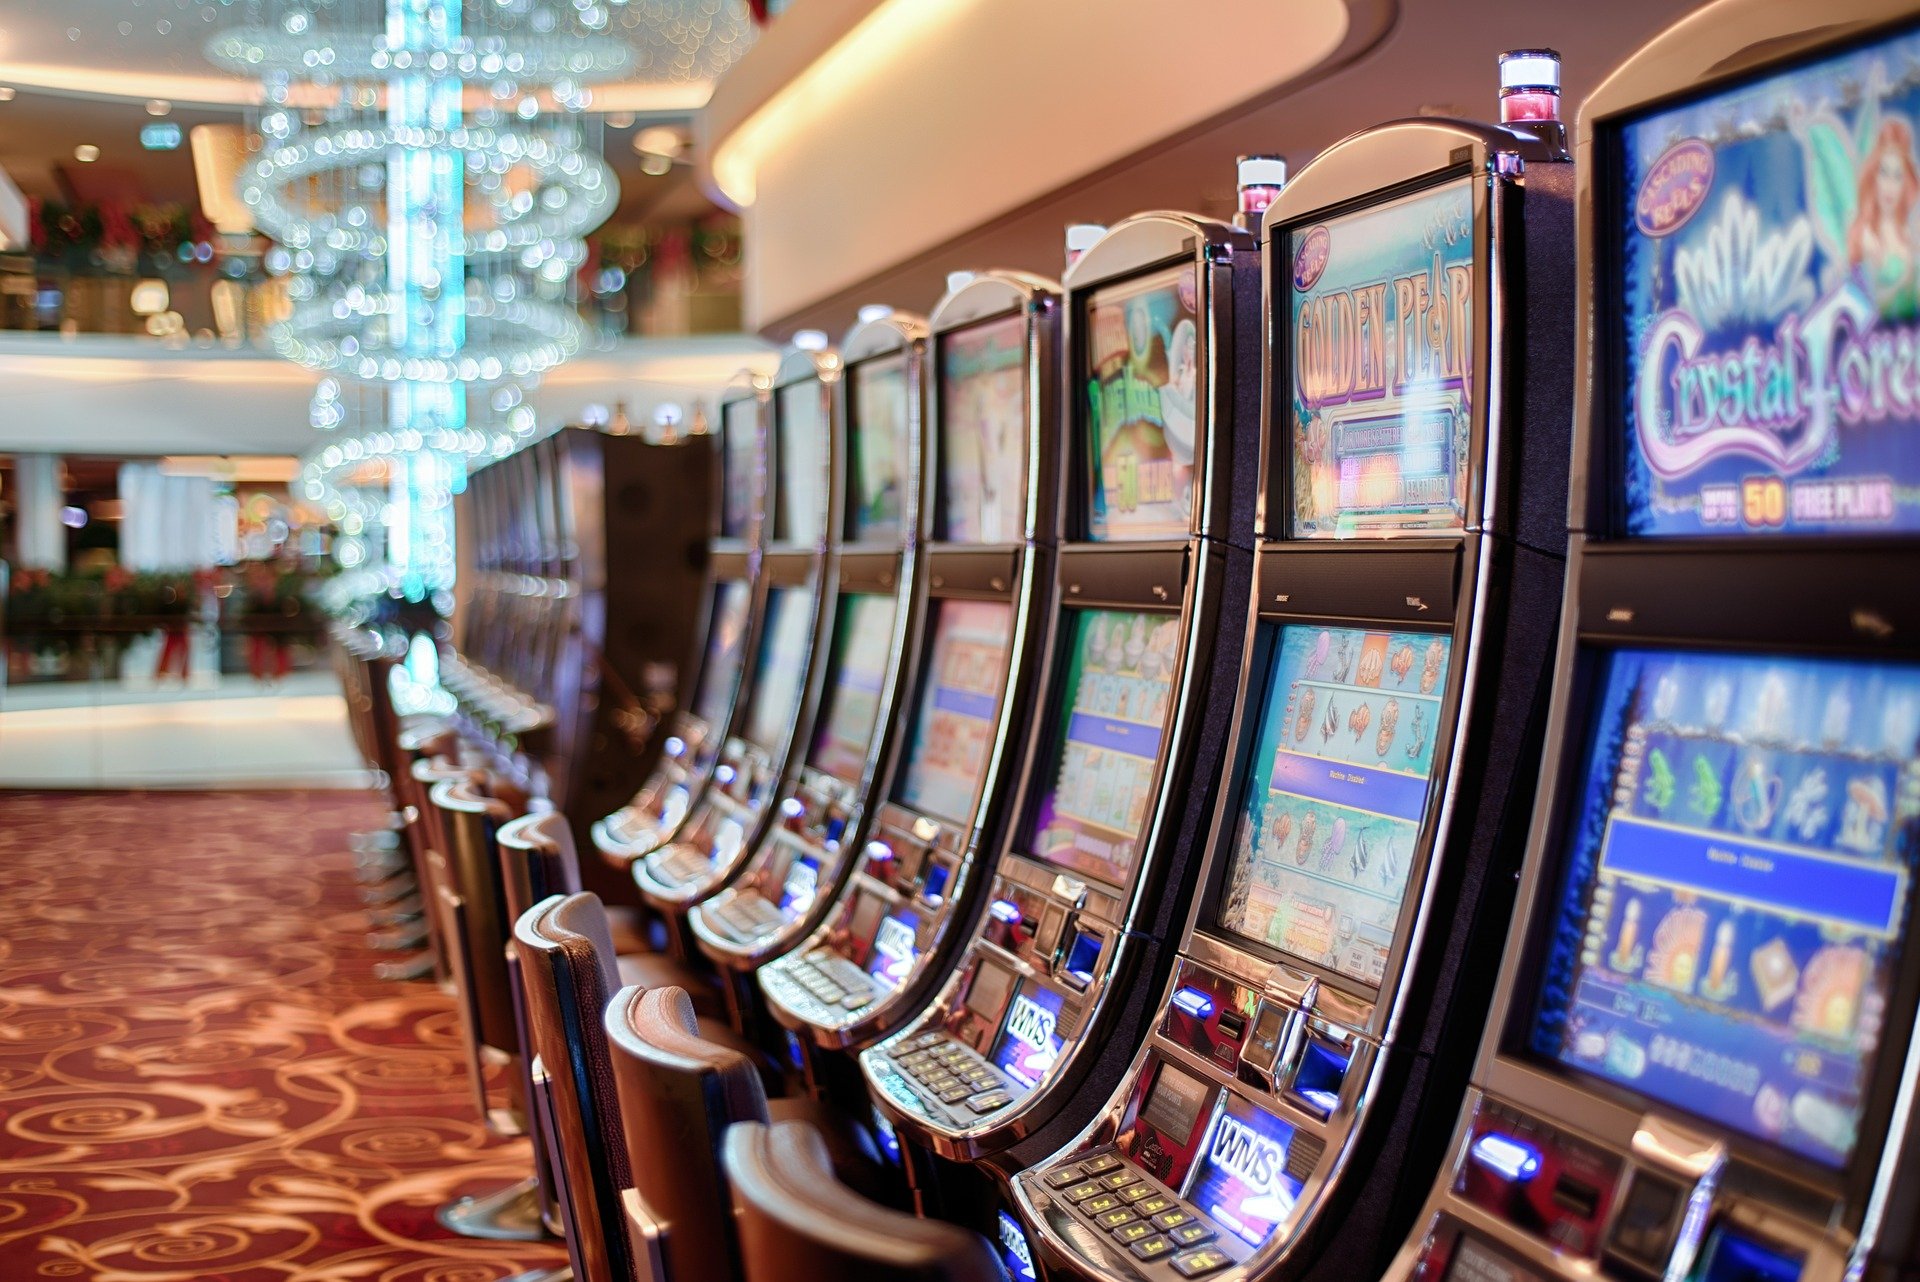 Before you start gambling, there are a few things you should know.